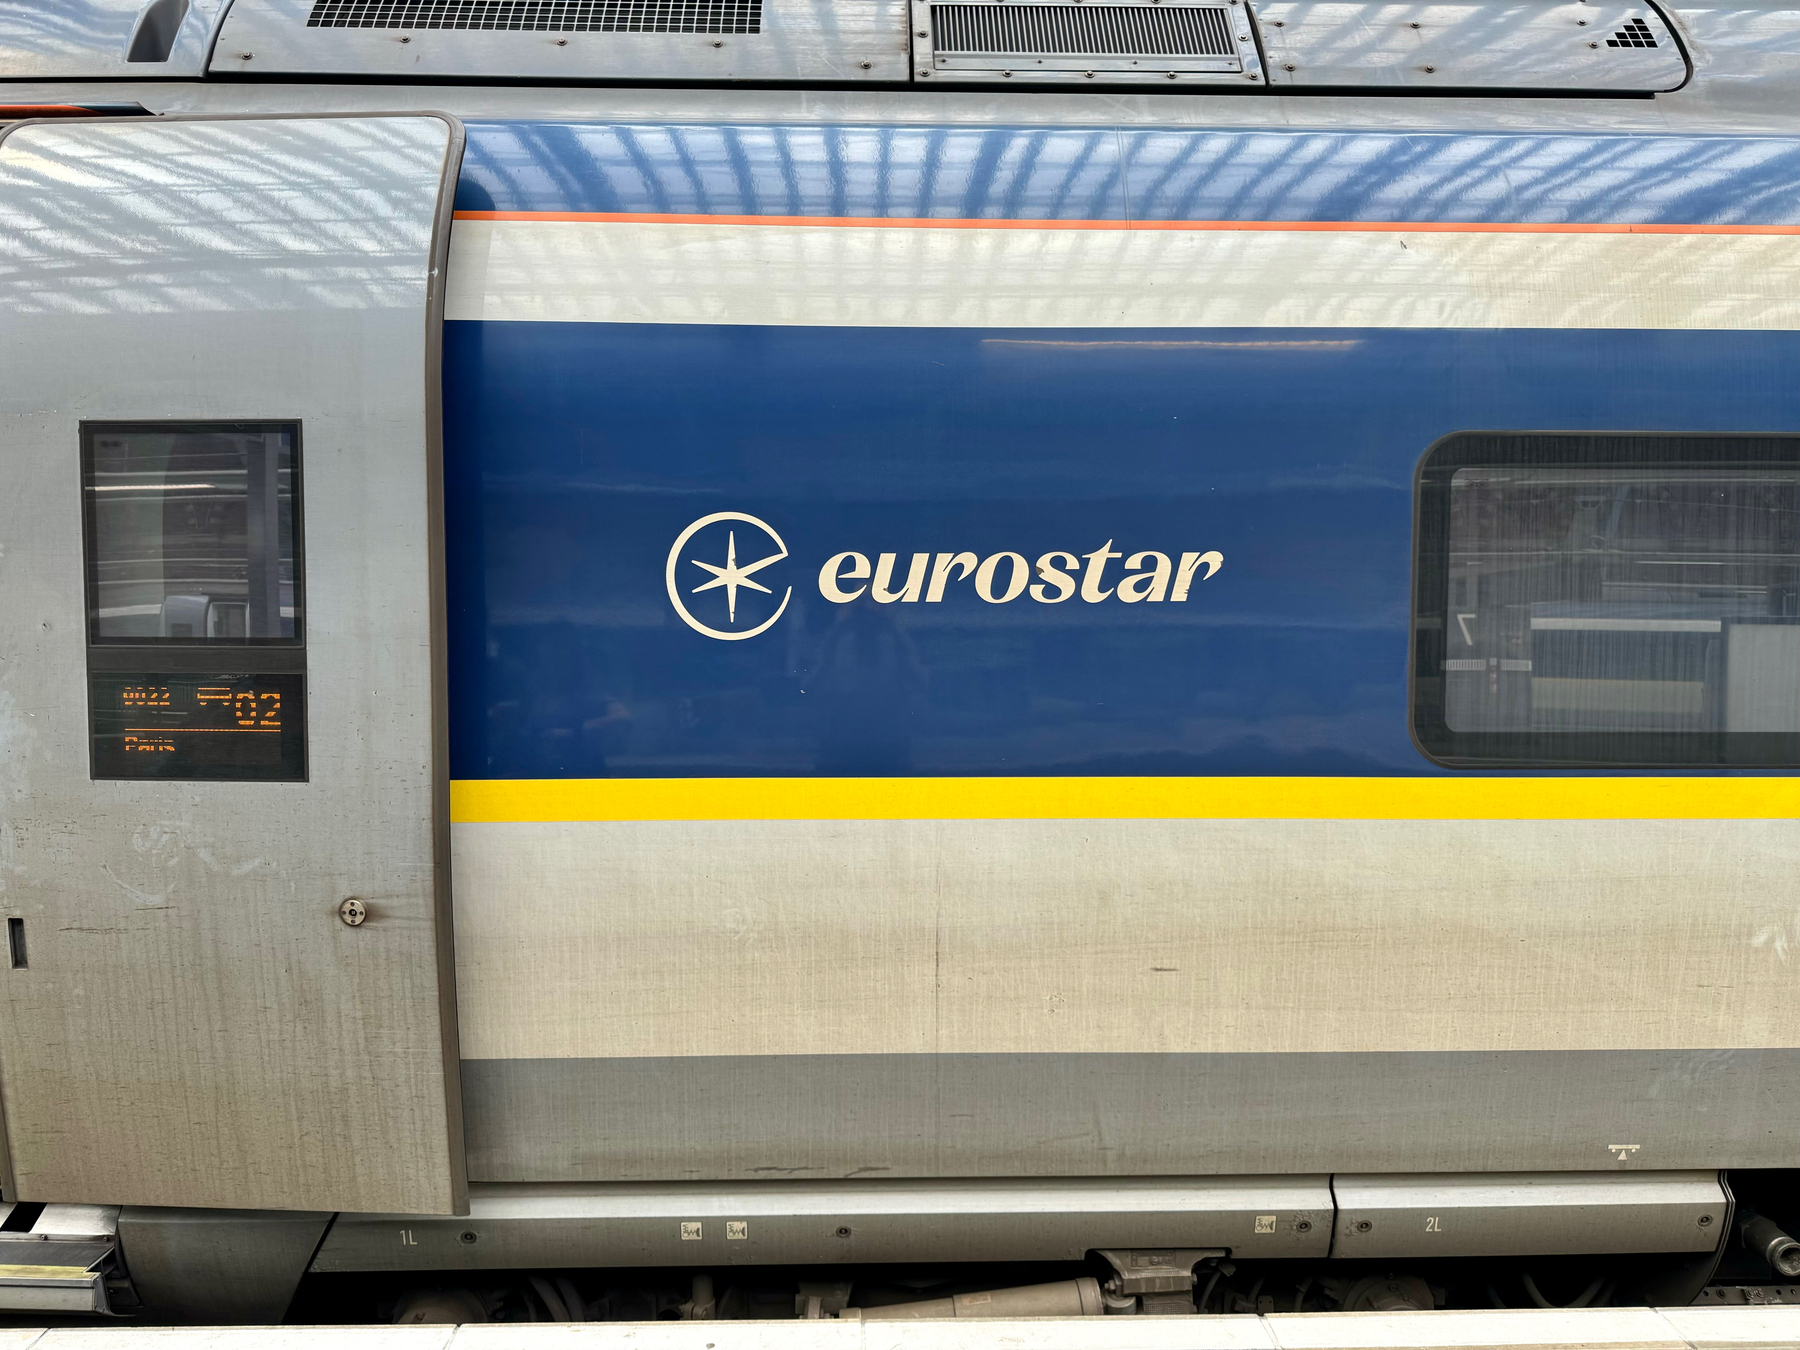 Eurostar train at a station with a destination sign showing “Paris.